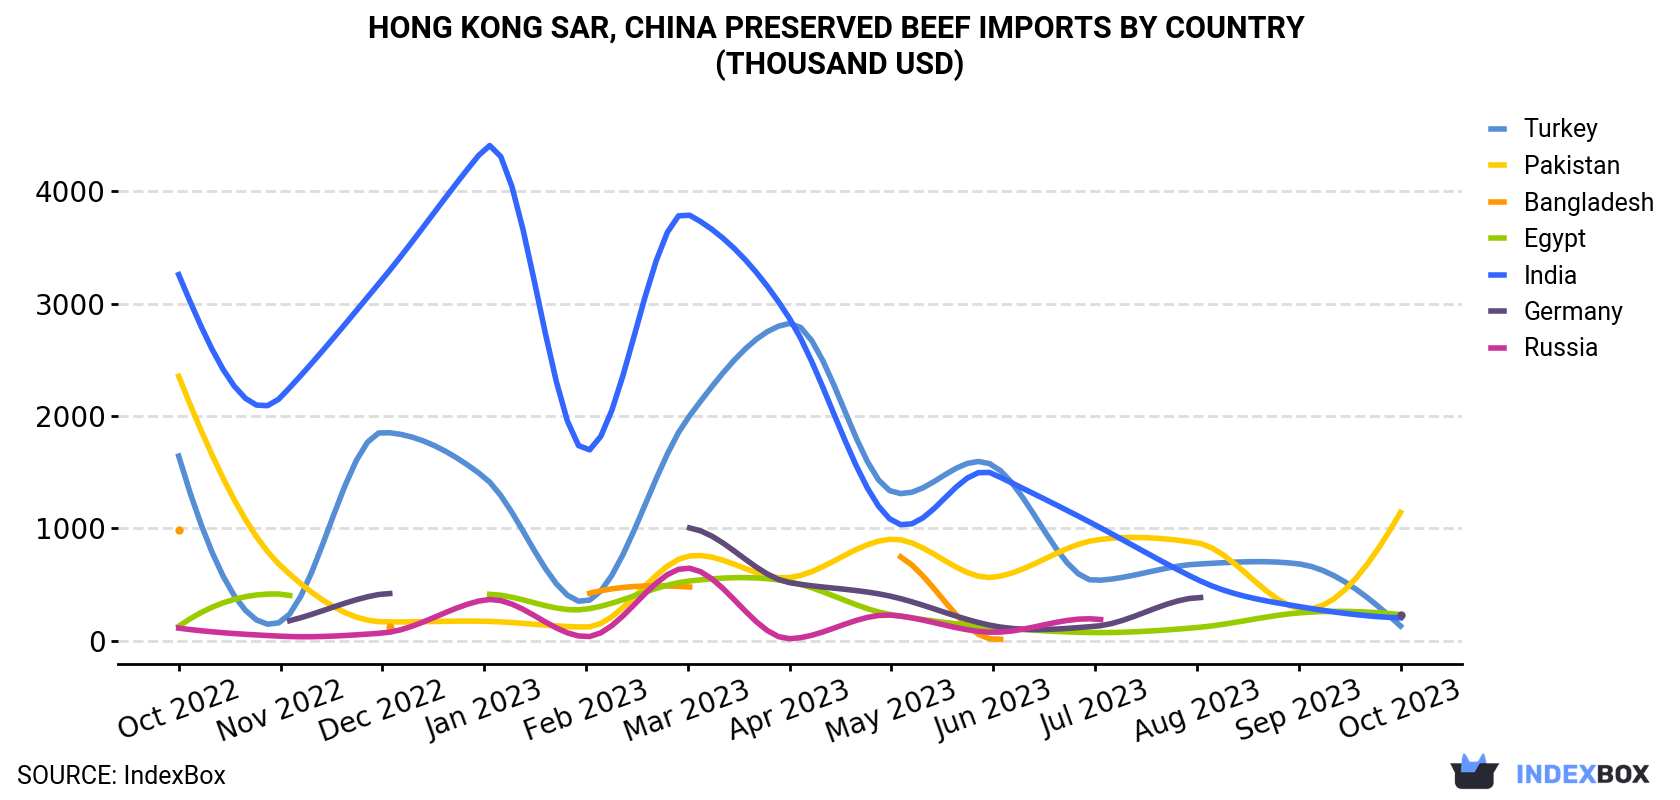 Hong Kong Preserved Beef Imports By Country (Thousand USD)